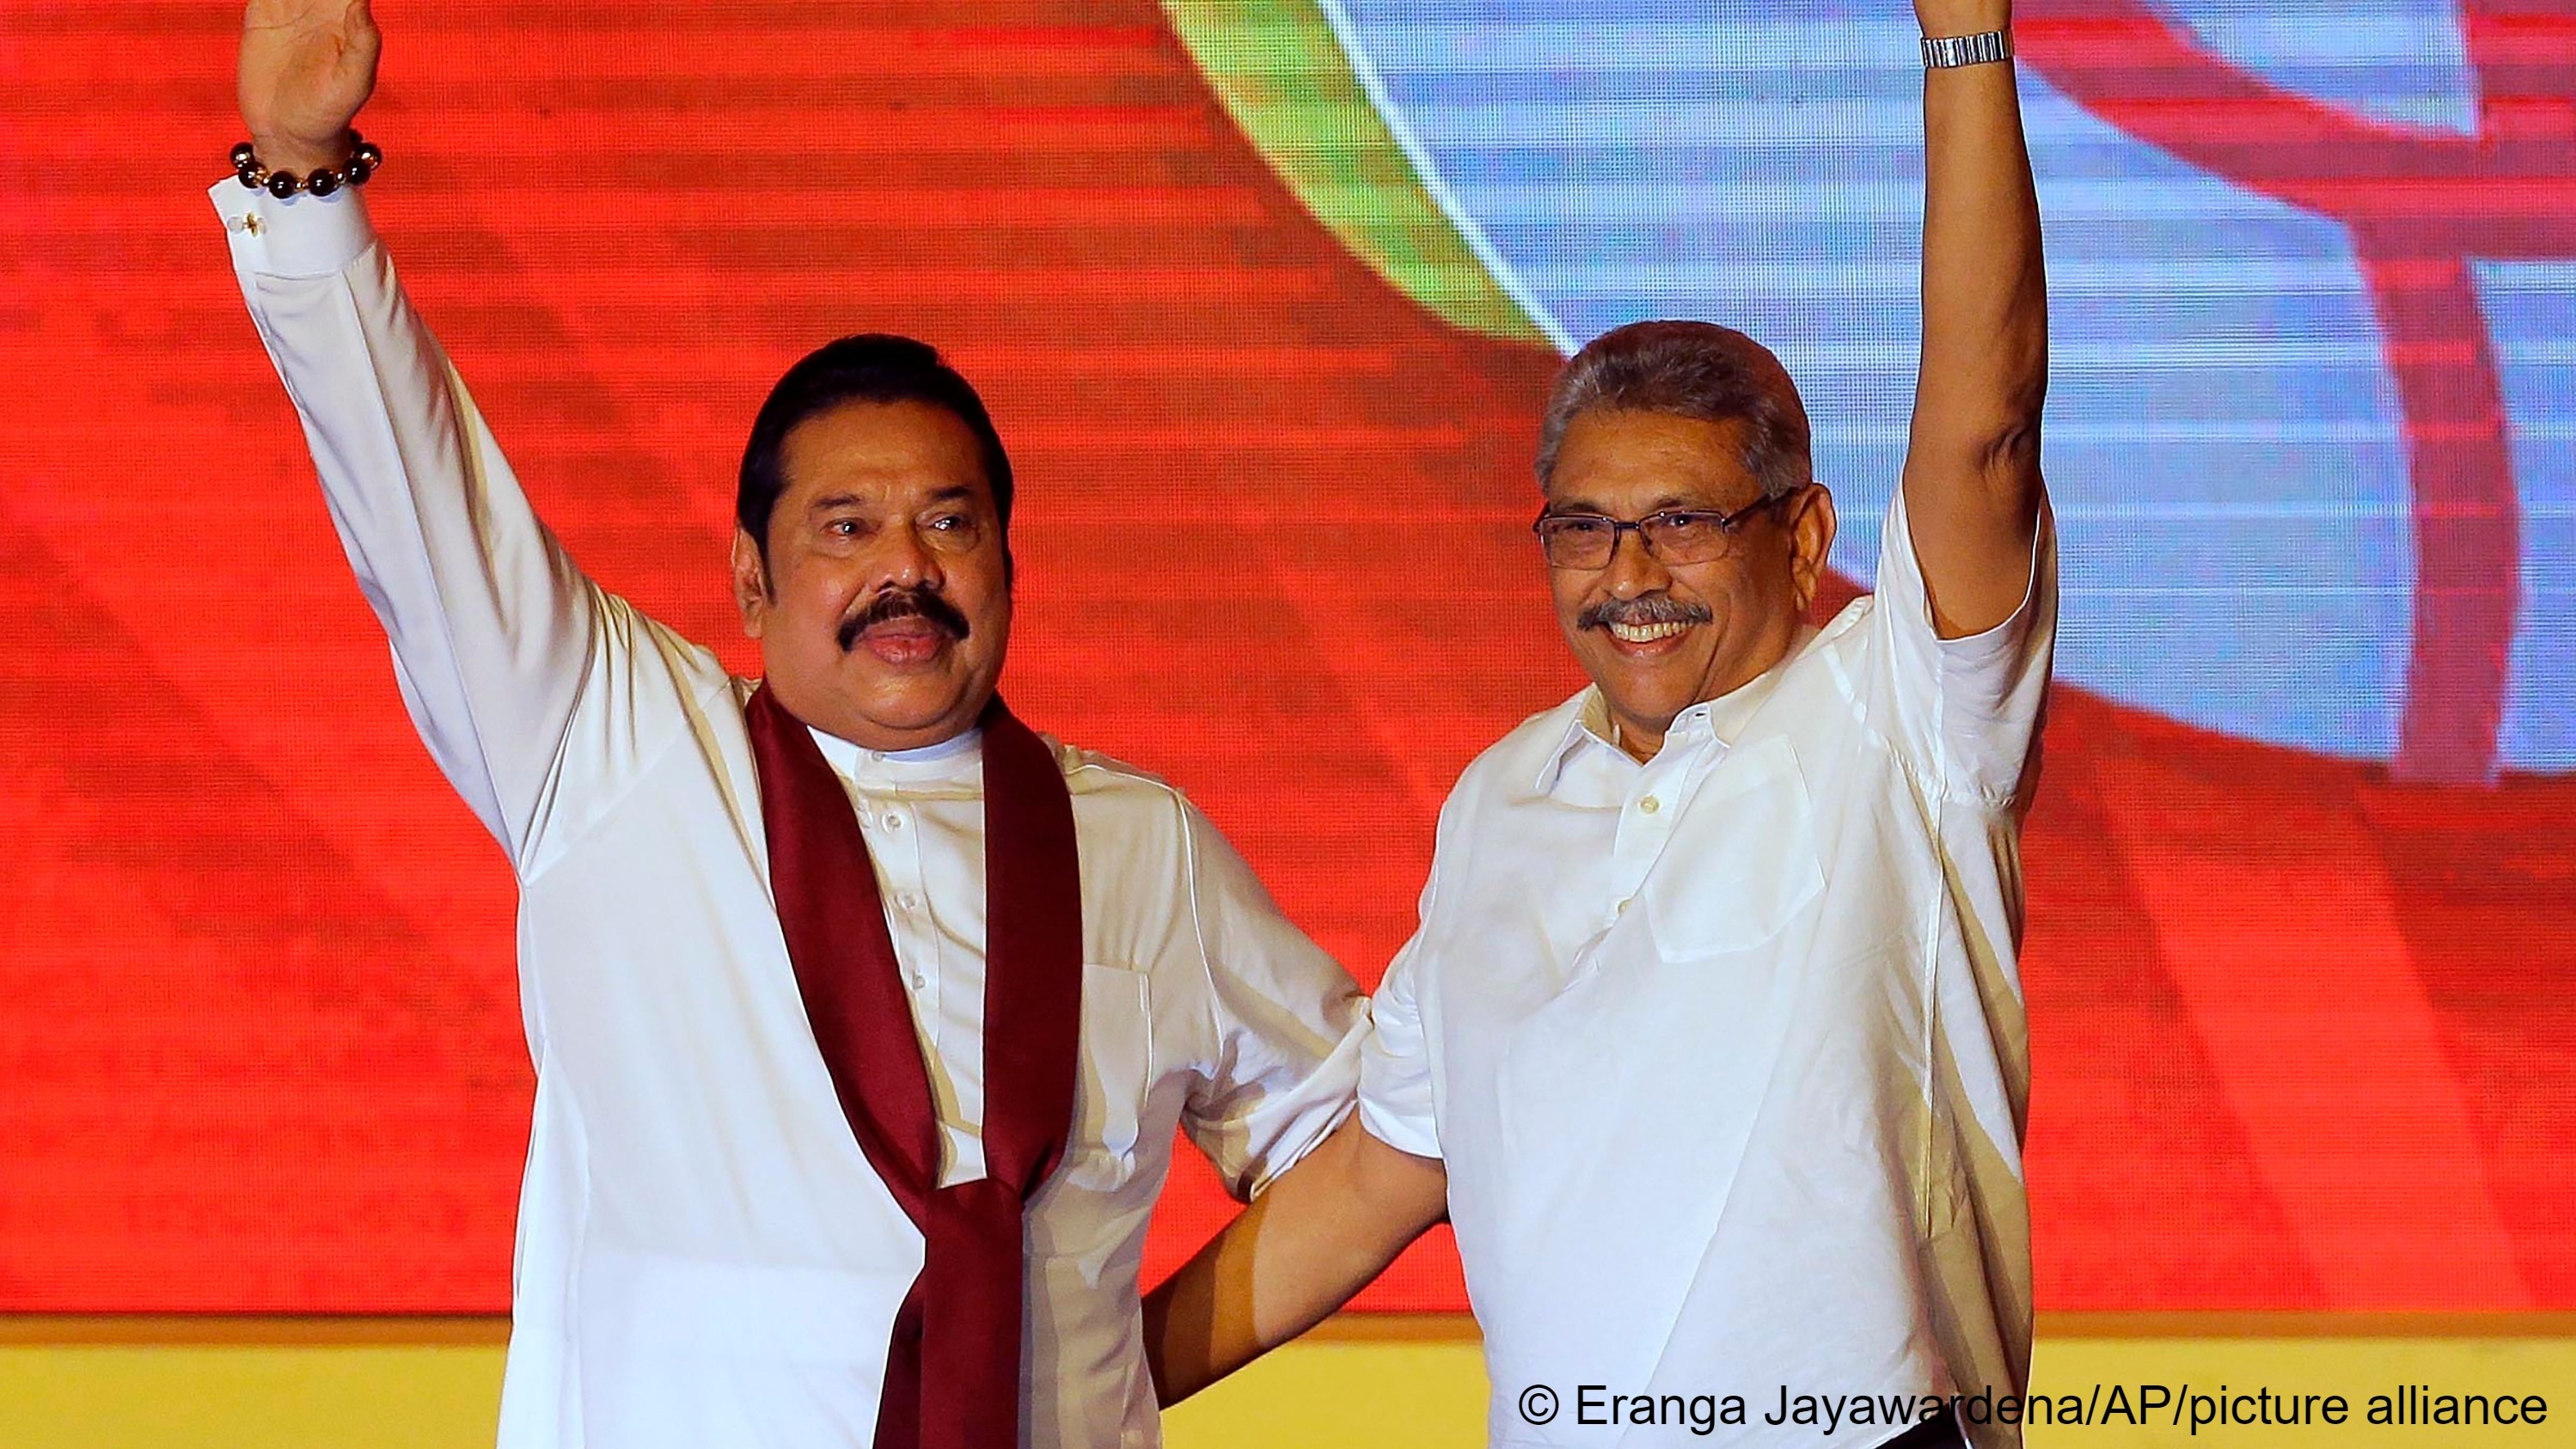 Mahinda Rajapaksa, left, and his brother Gotabaya Rajapaksa wave to supporters during a party convention held to announce Gotabaya's presidential candidacy in Colombo, Sri Lanka, 11 August 2019 (photo: AP Photo/Eranga Jayawardena)